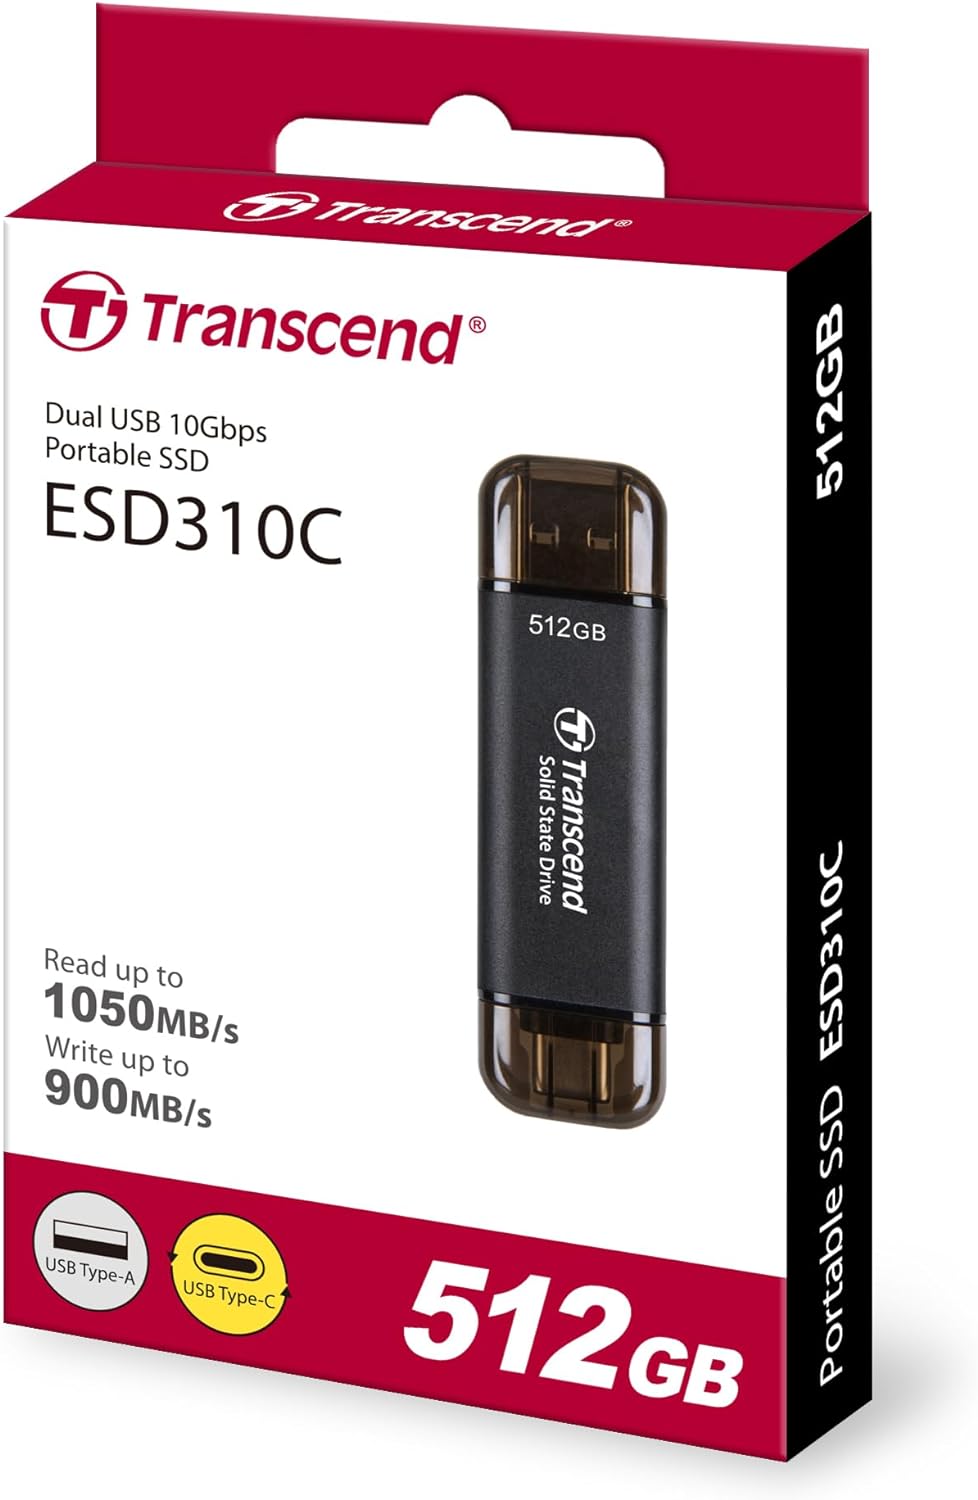 Transcend 512GB USB 10Gbps with Type-C and Type-A Portable SSD External Hard Drive (Brand New)